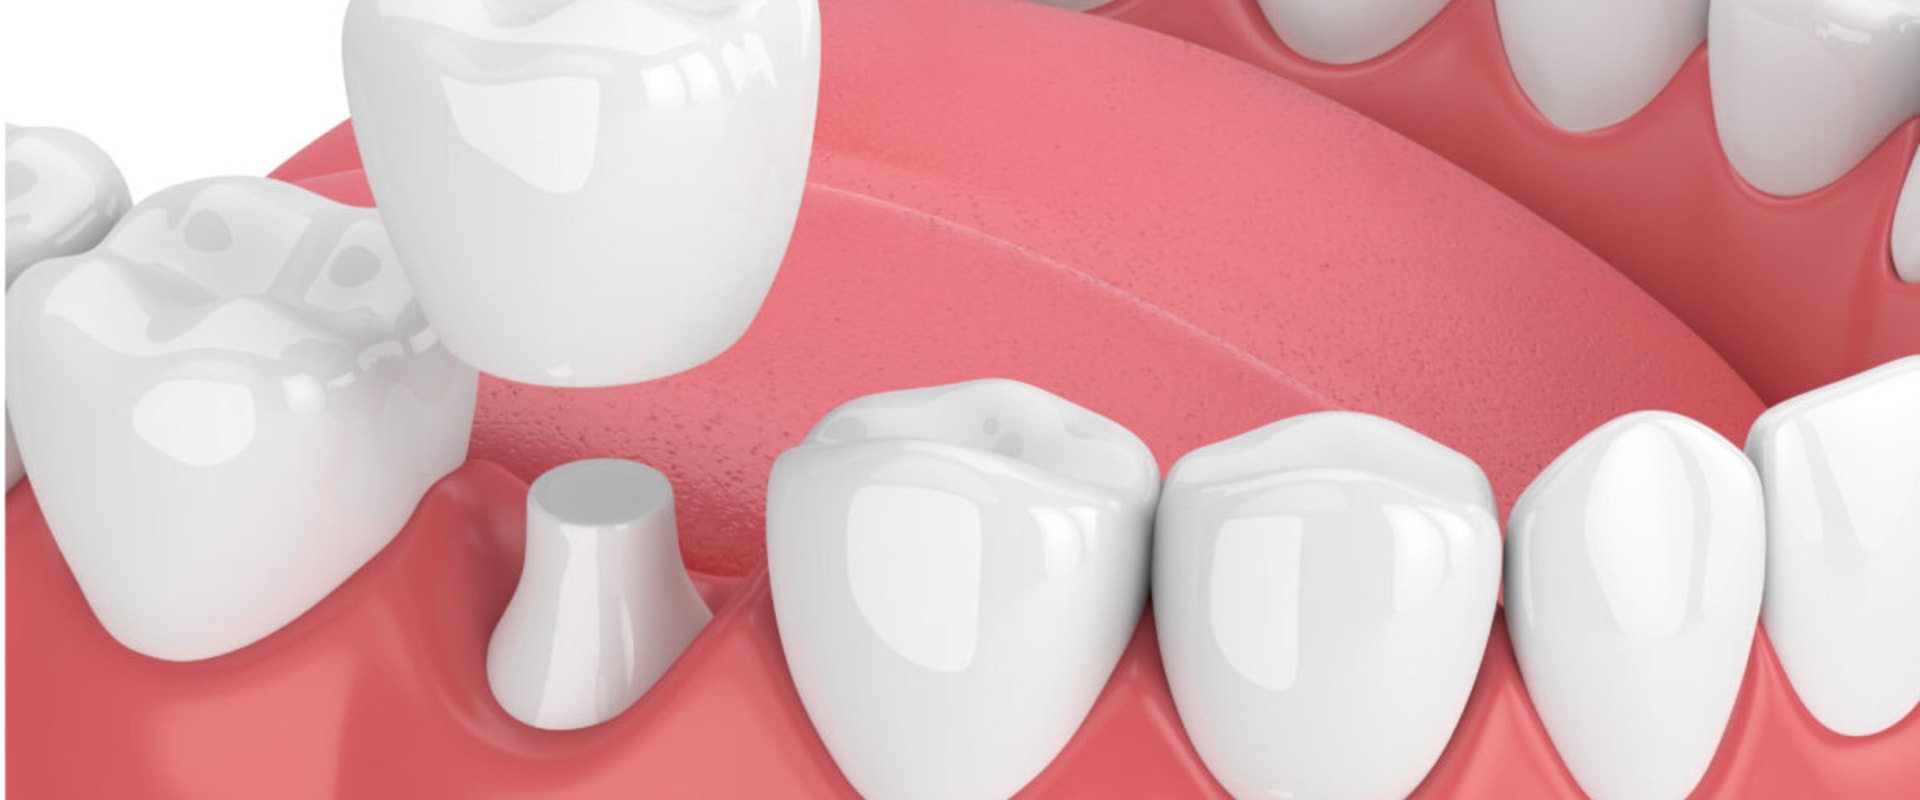 Can an Emergency Dentist Provide You with a Permanent Crown on the Same Day of Your Visit?